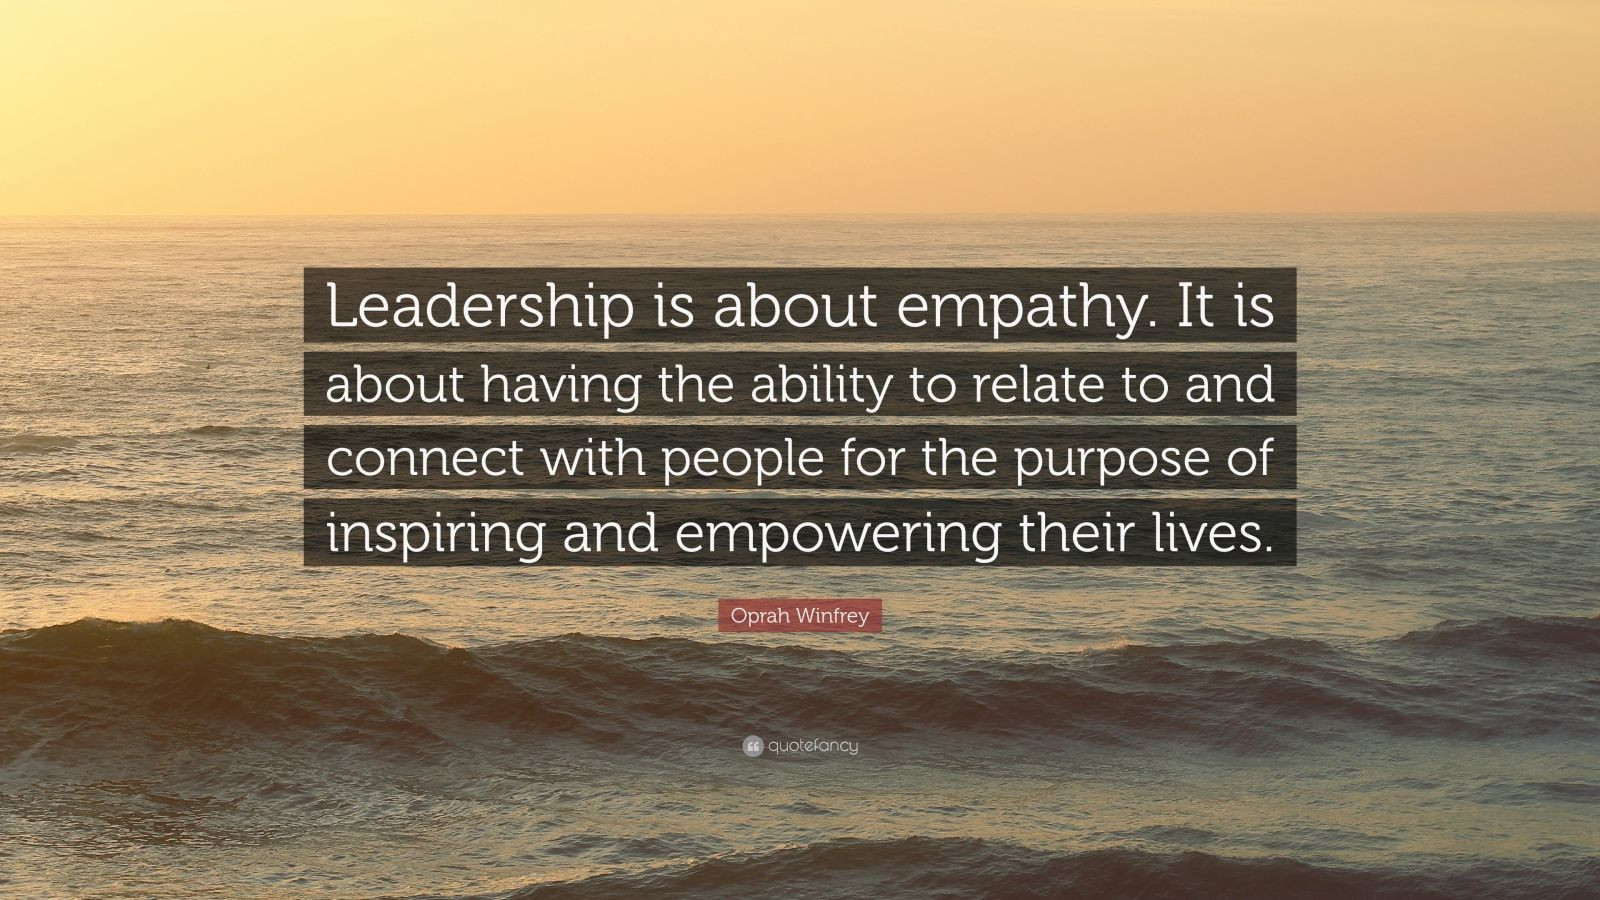 Inspiring Leadership Quotes
 Oprah Winfrey Quote “Leadership is about empathy It is